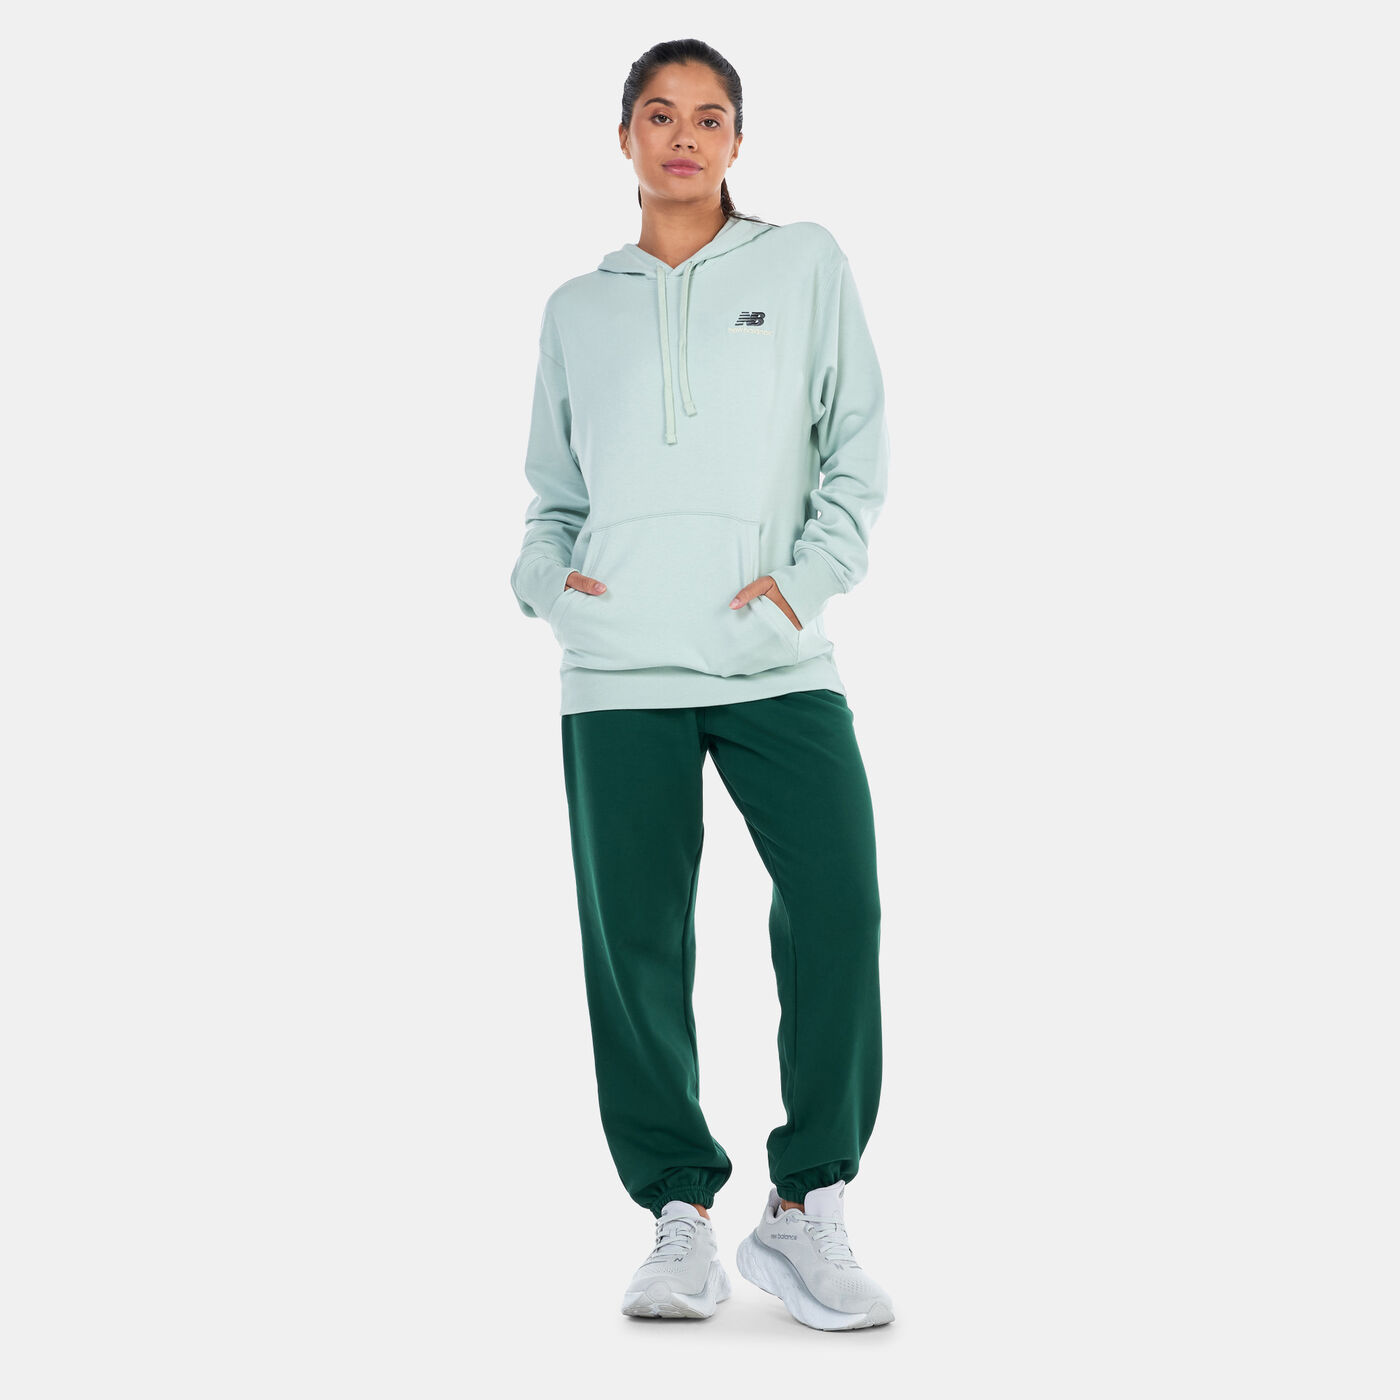 Women's Uni-ssentials French Terry Hoodie